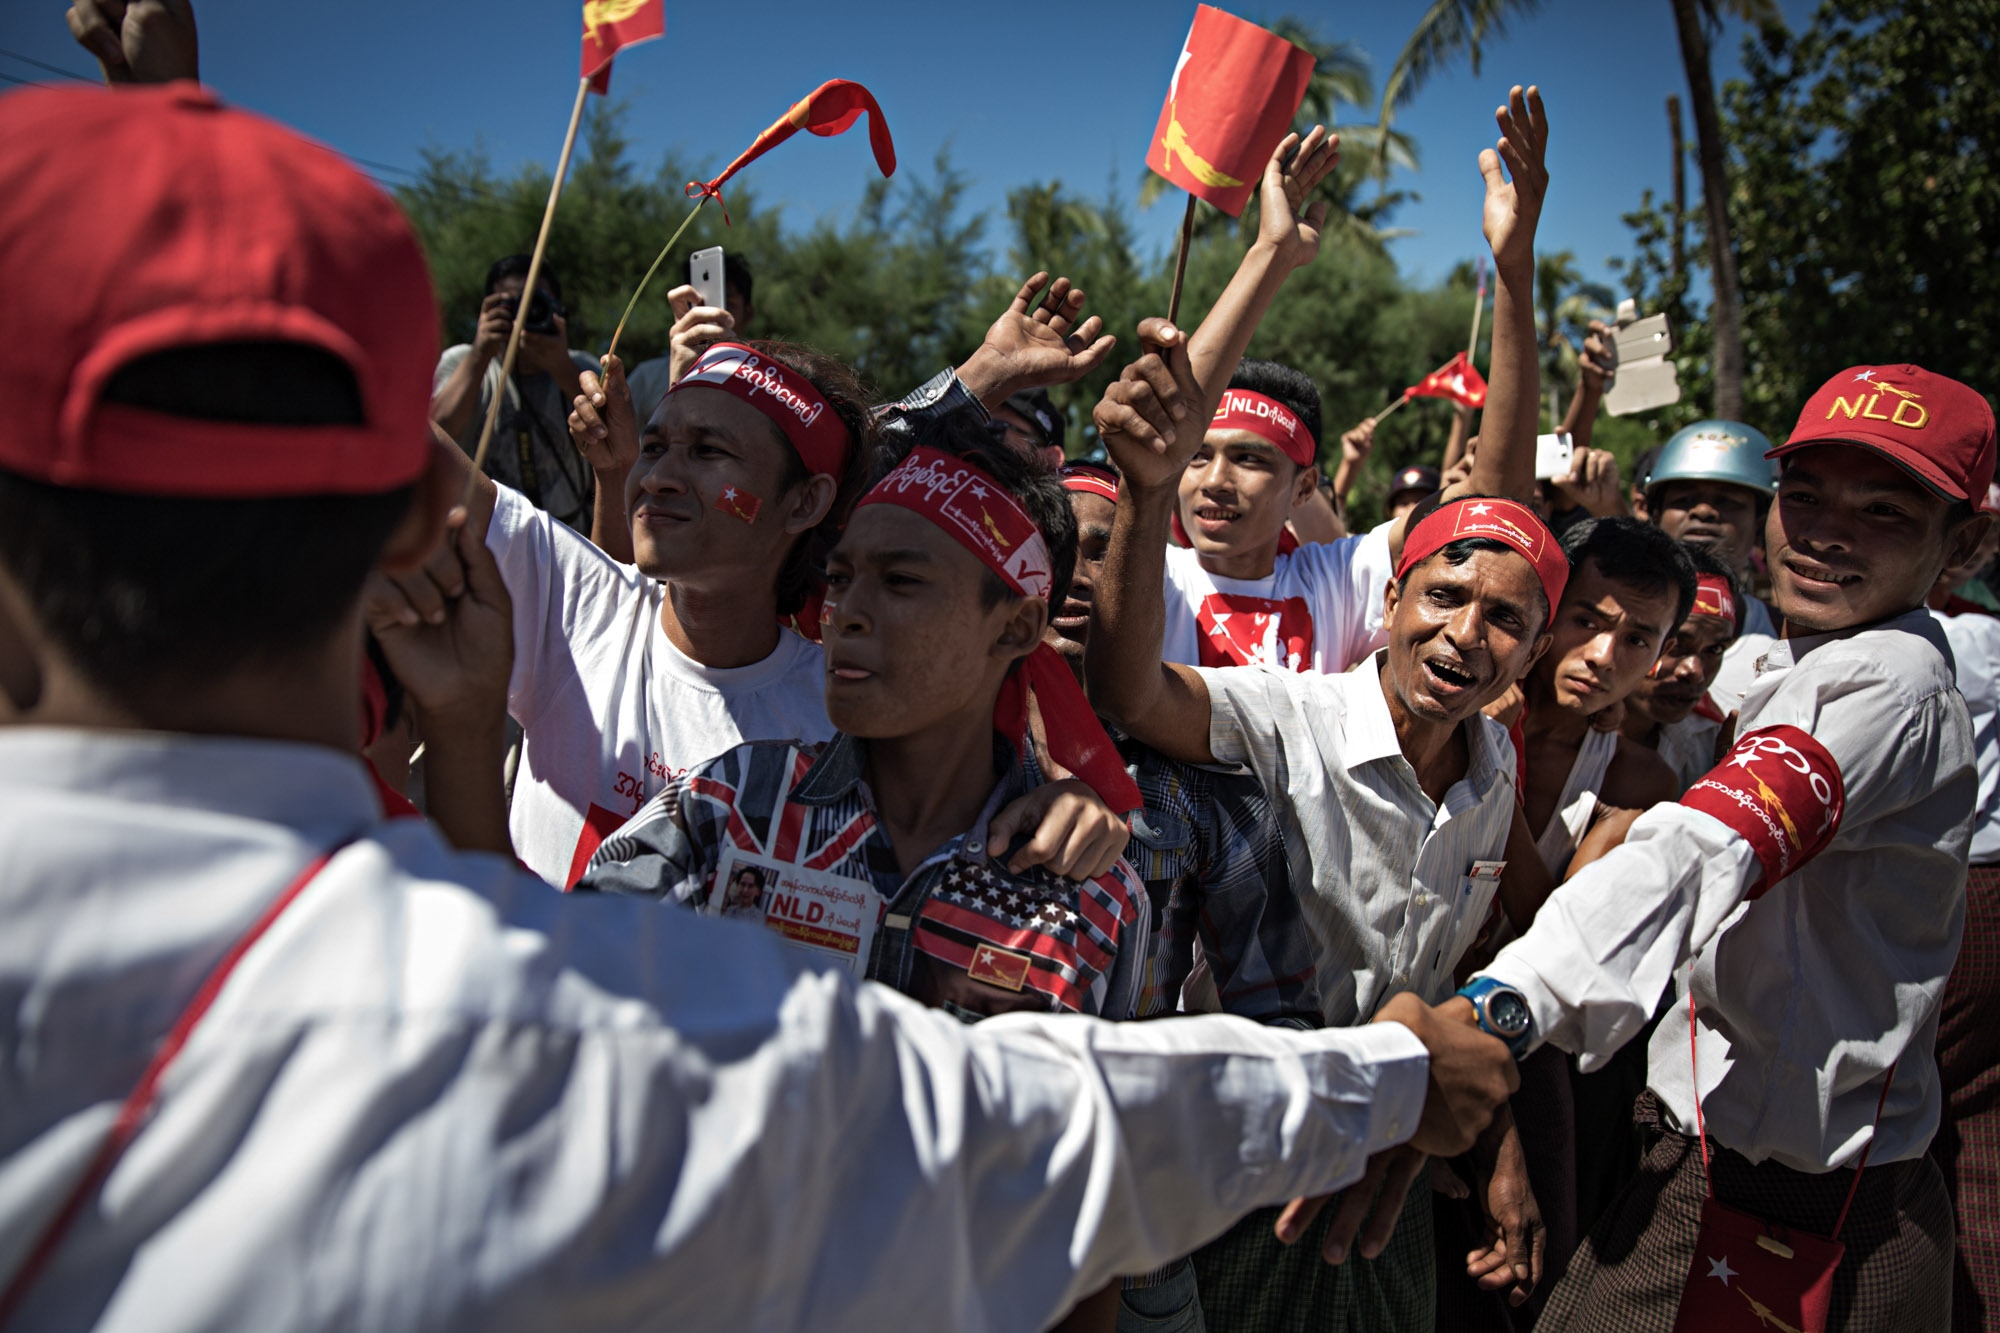 Myanmar Election: Al Jazeera - NLD (National League for Democracy) supporters at a rally...